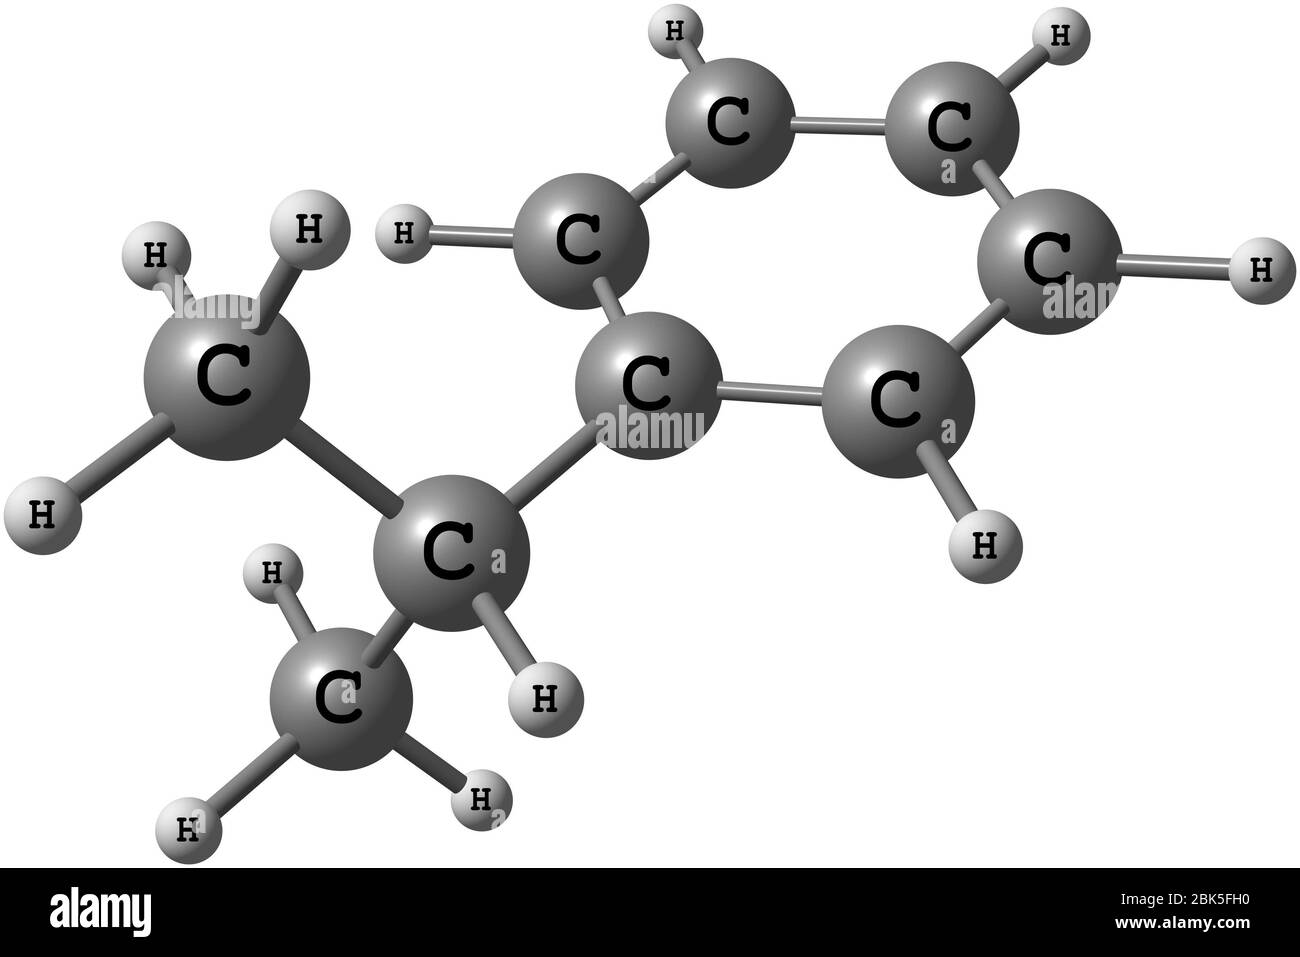 Cumene is the common name for isopropylbenzene, an organic compound that is based on an aromatic hydrocarbon with an aliphatic substitution Stock Photo